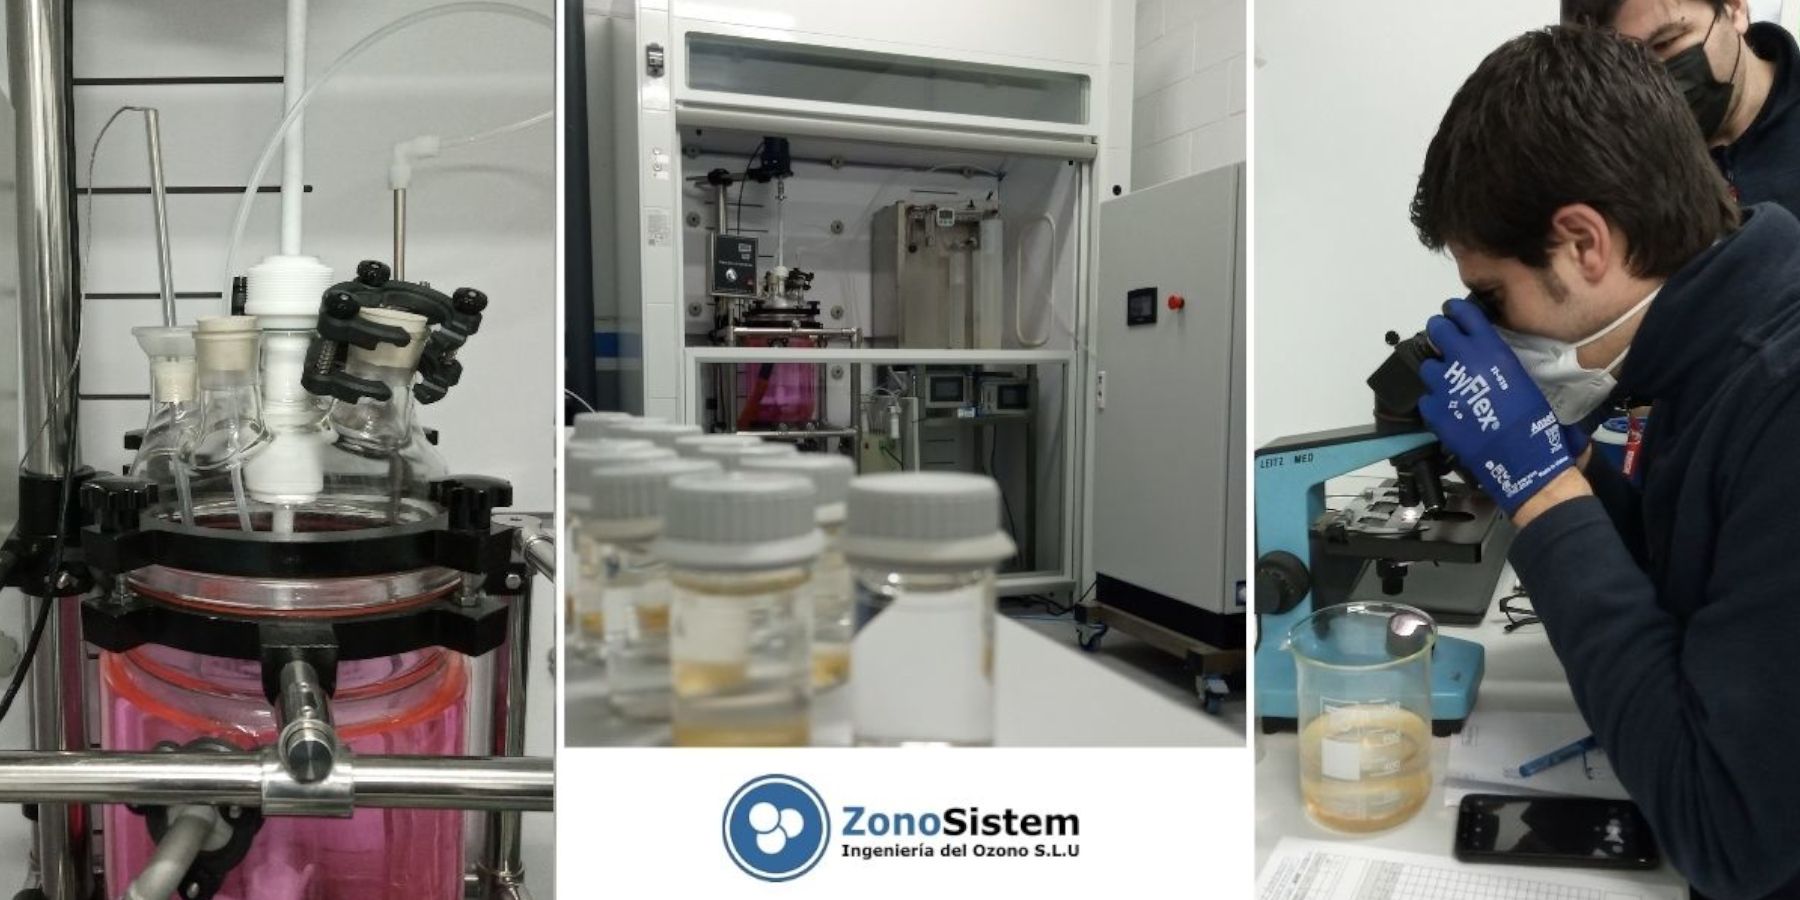 Zonosistem has a state-of-the-art laboratory for ozone measurement and generation